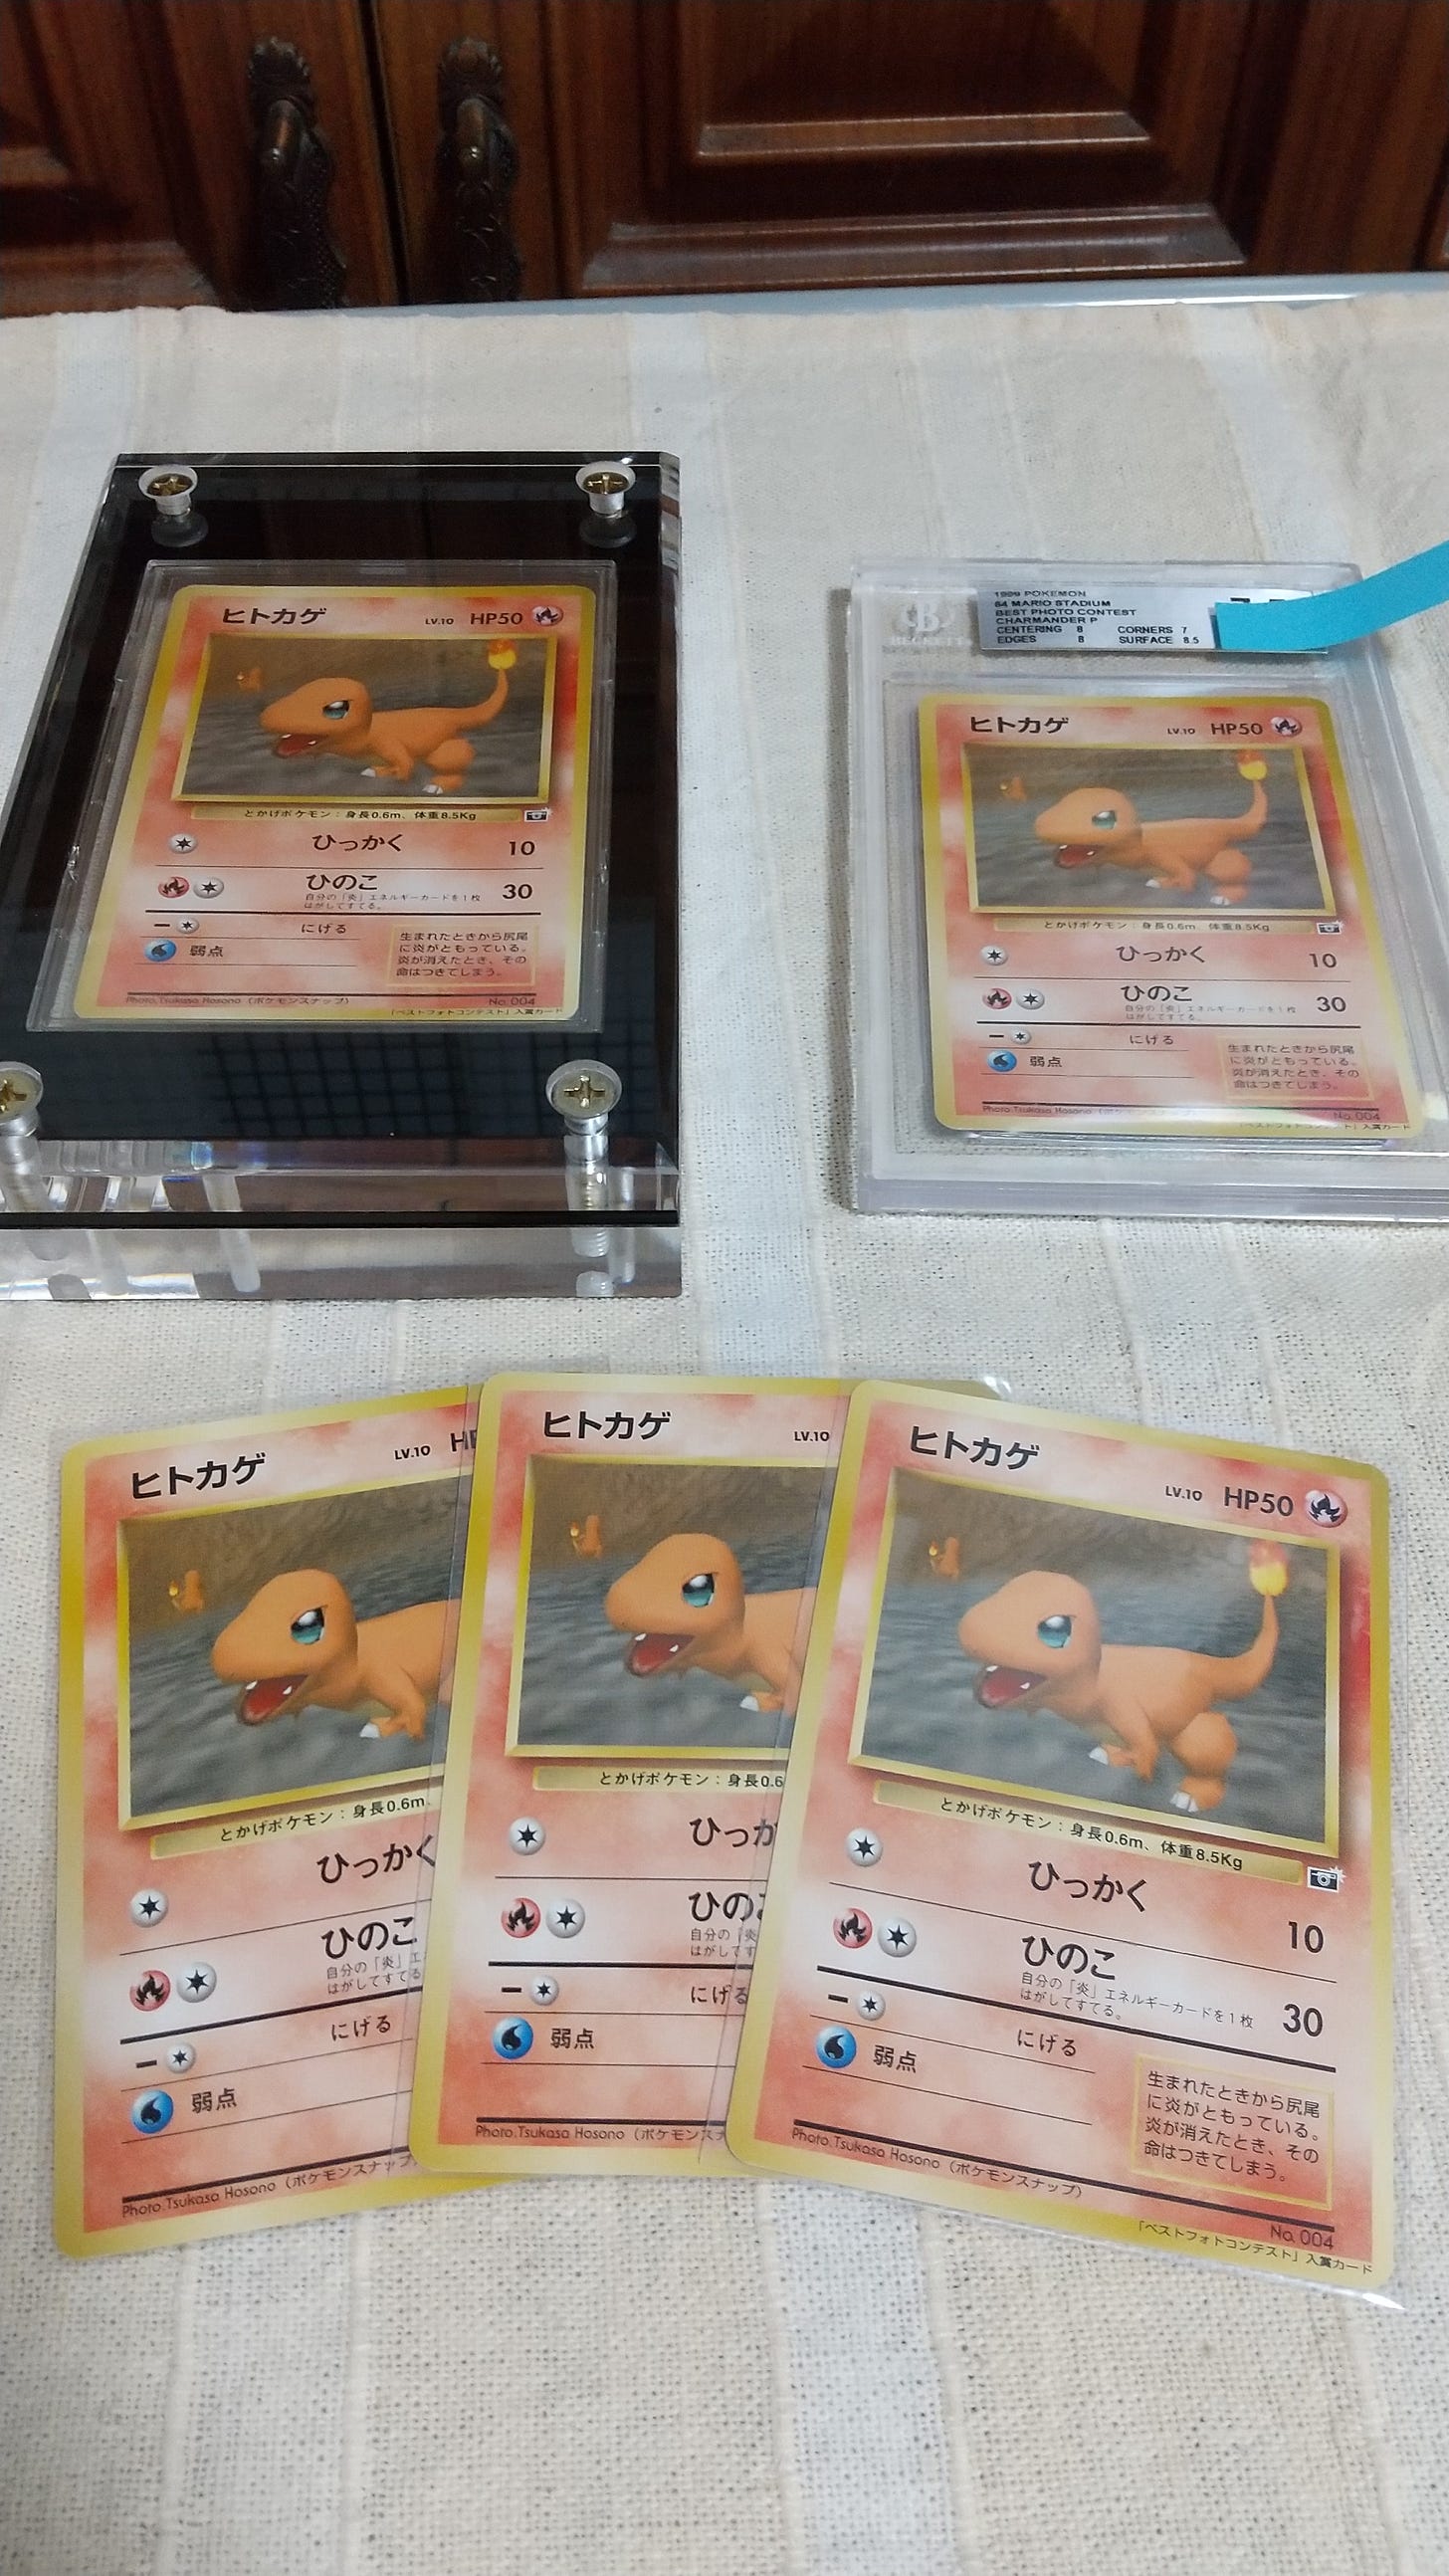 Five copies of Tsukasa's Charmander card. One copy inside of an acrylic frame, one graded copy, and three sleeved cards